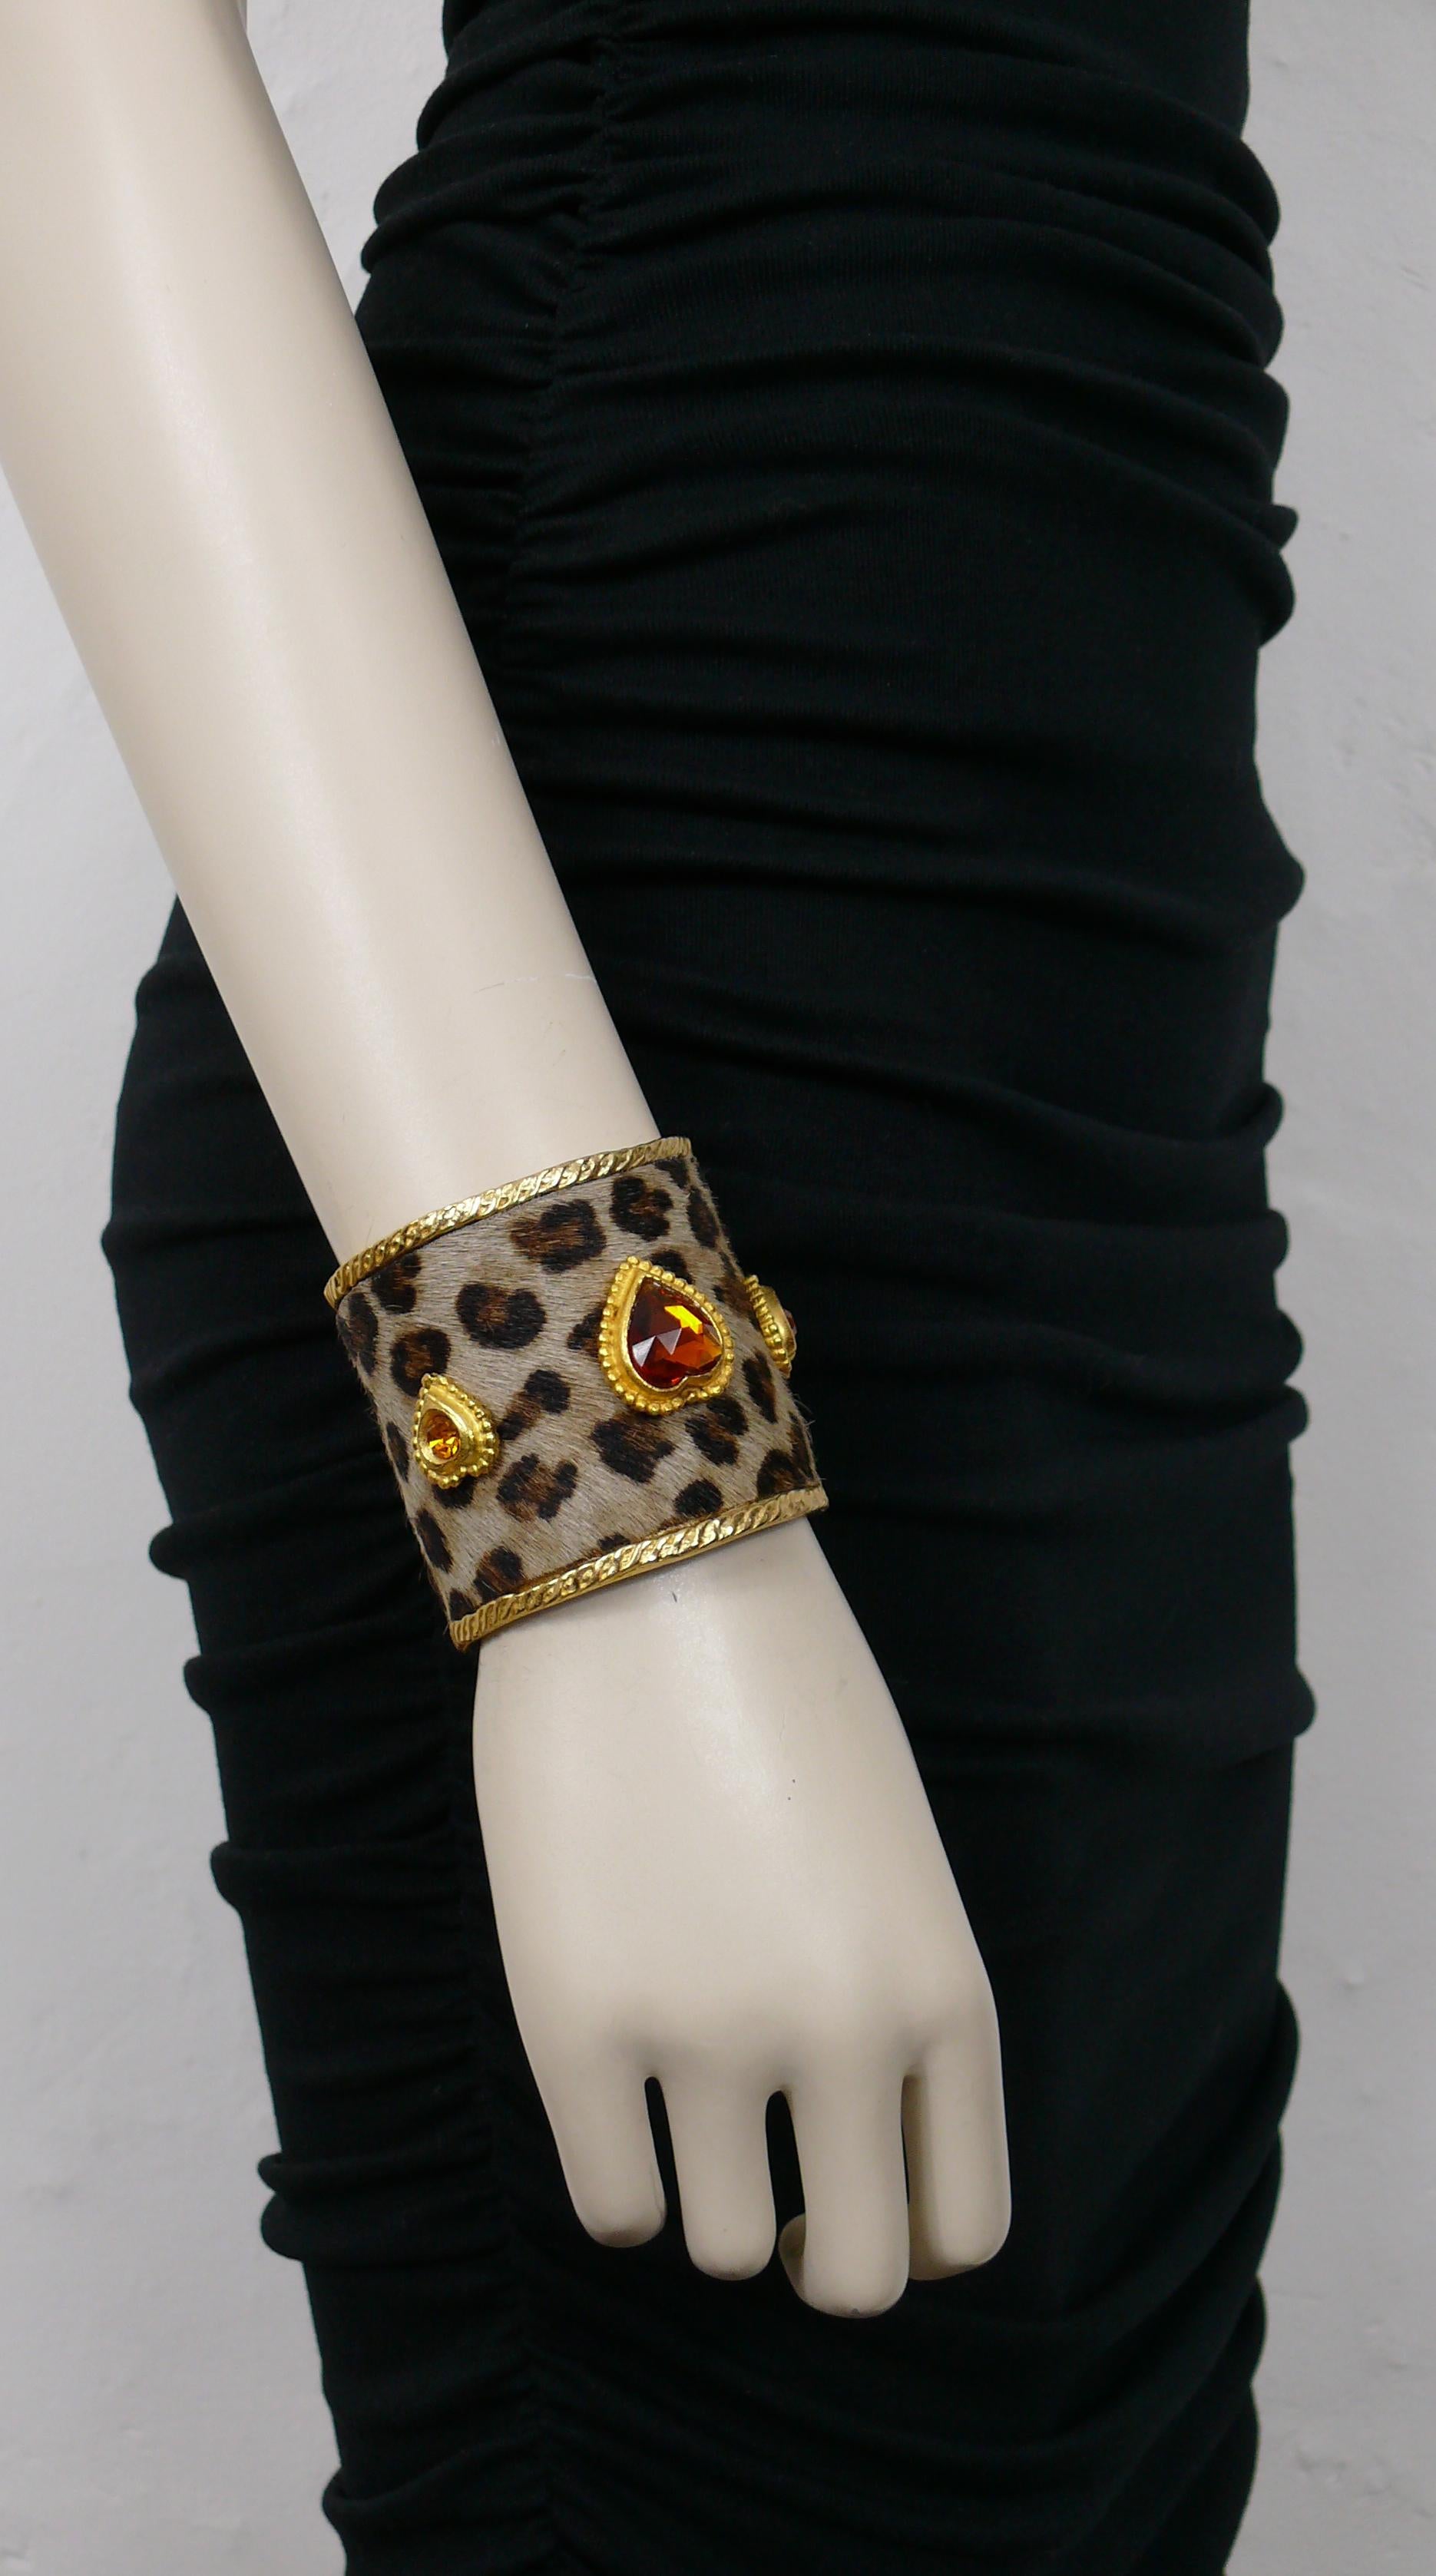 EDOUARD RAMBAUD vintage gold toned cuff bracelet featuring a faux leopard skin and three gold toned hearts embellished with crystals.

Embossed EDOUARD RAMBAUD Paris.

Indicative measurements : inner circumference approx. 16.34 cm (6.43 inches) /